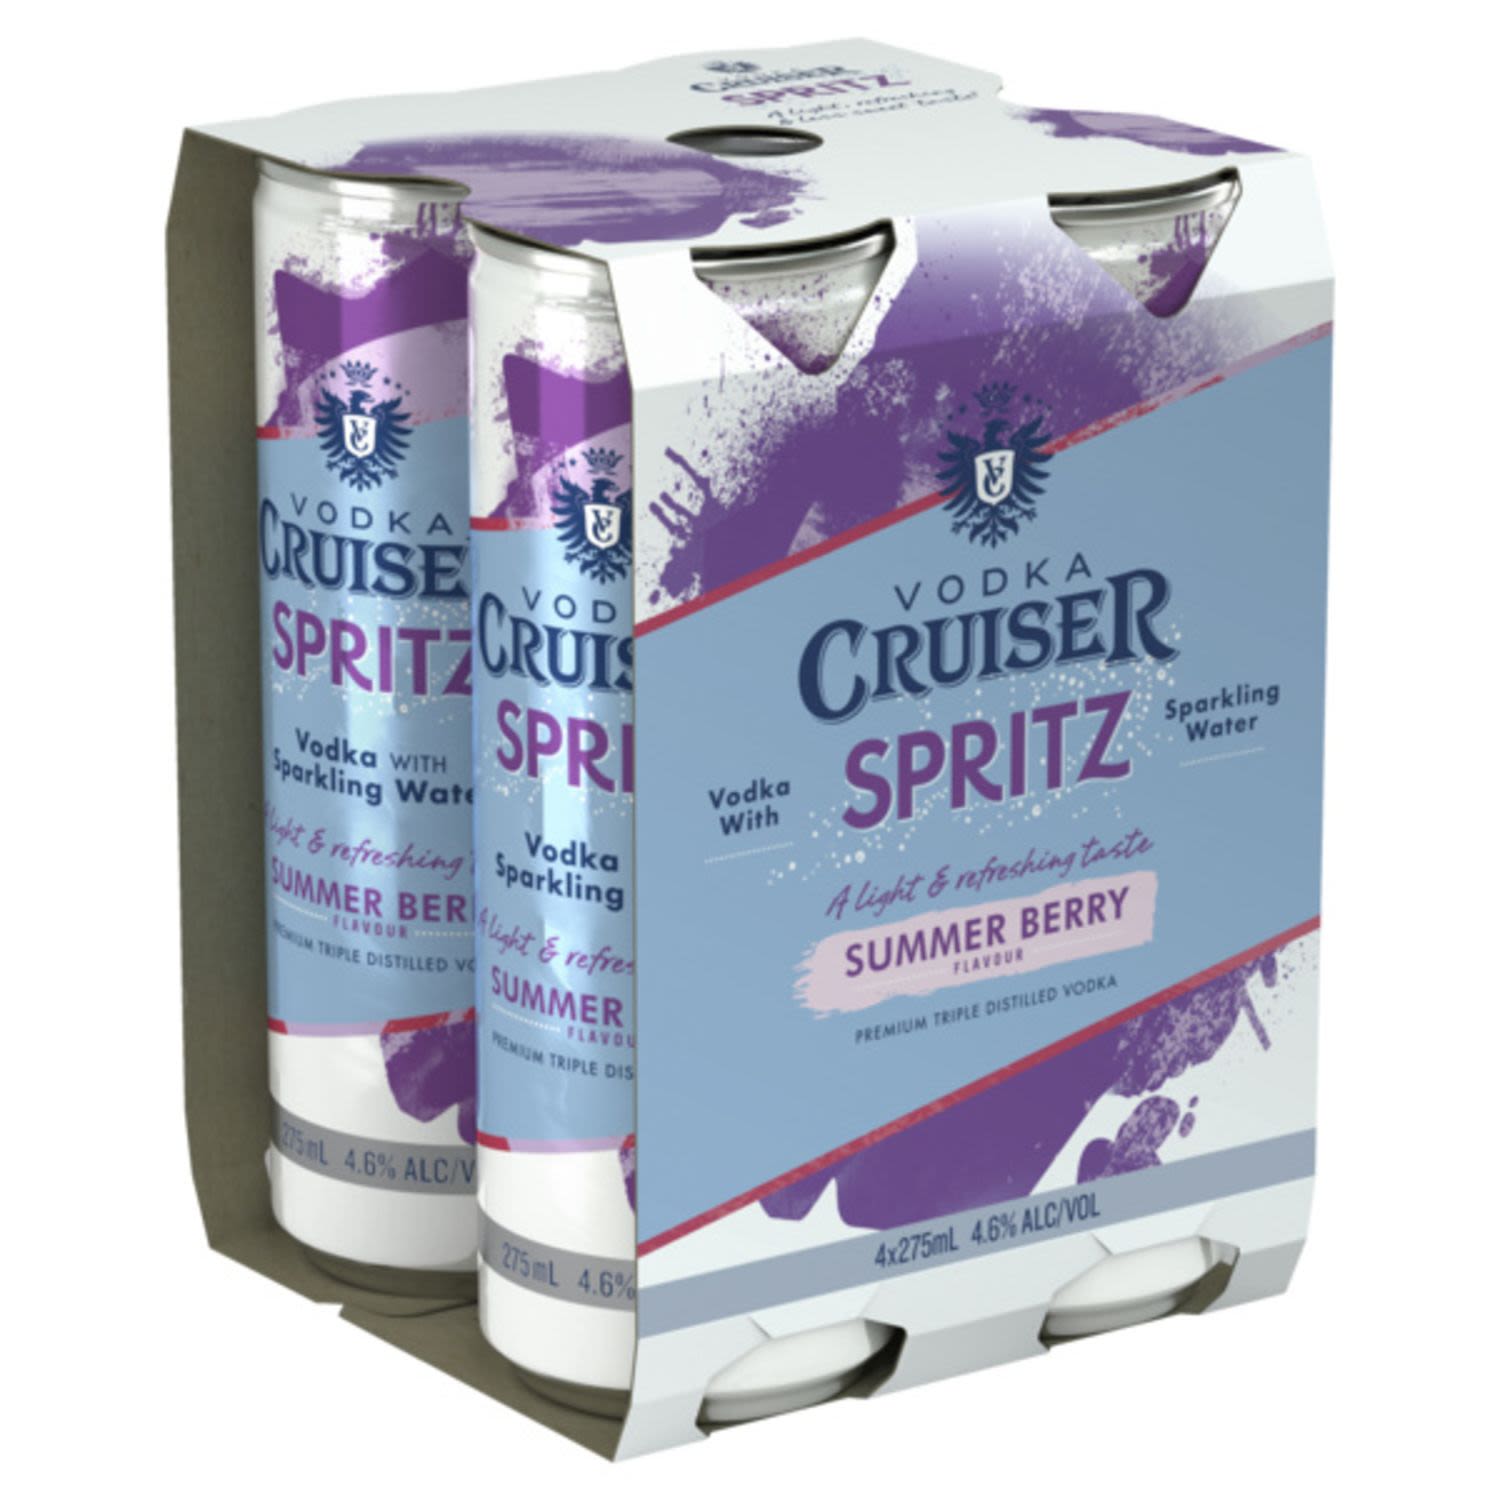 <p>A refreshingly light and breezy drink. Low in sugar too.</p>
<p><br></p>
<p>Alcohol Volume: 4.60%</p>
<p><br></p>
<p>Pack Format: 4 Pack</p>
<p><br></p>
<p>Standard Drinks: 1.1</p>
<p><br></p>
<p>Pack Type: Can</p>